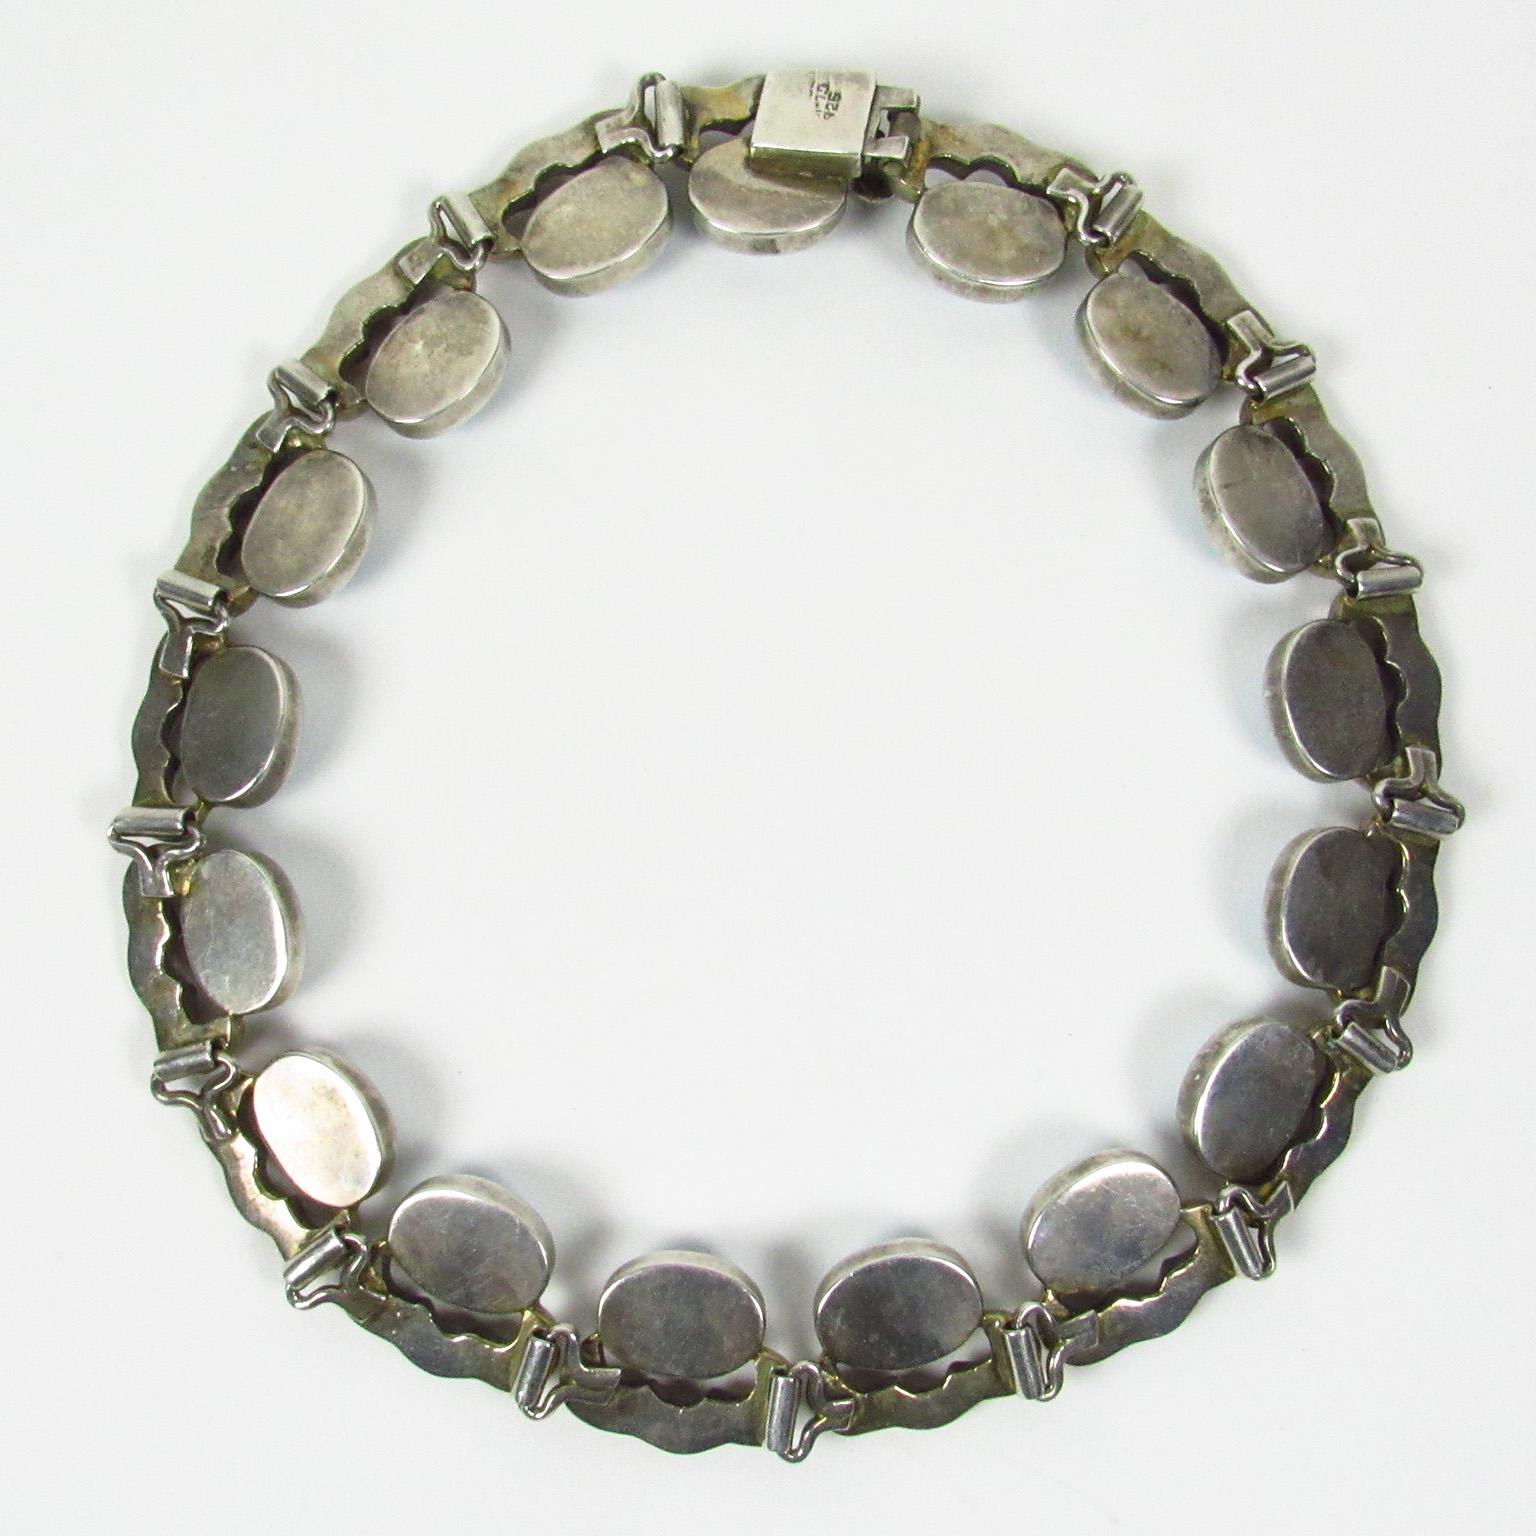 Very rare Mexican sterling silver choker style collar necklace comprised of seventeen silver links with oval Murano glass faux turquoise pieces. Stamped 